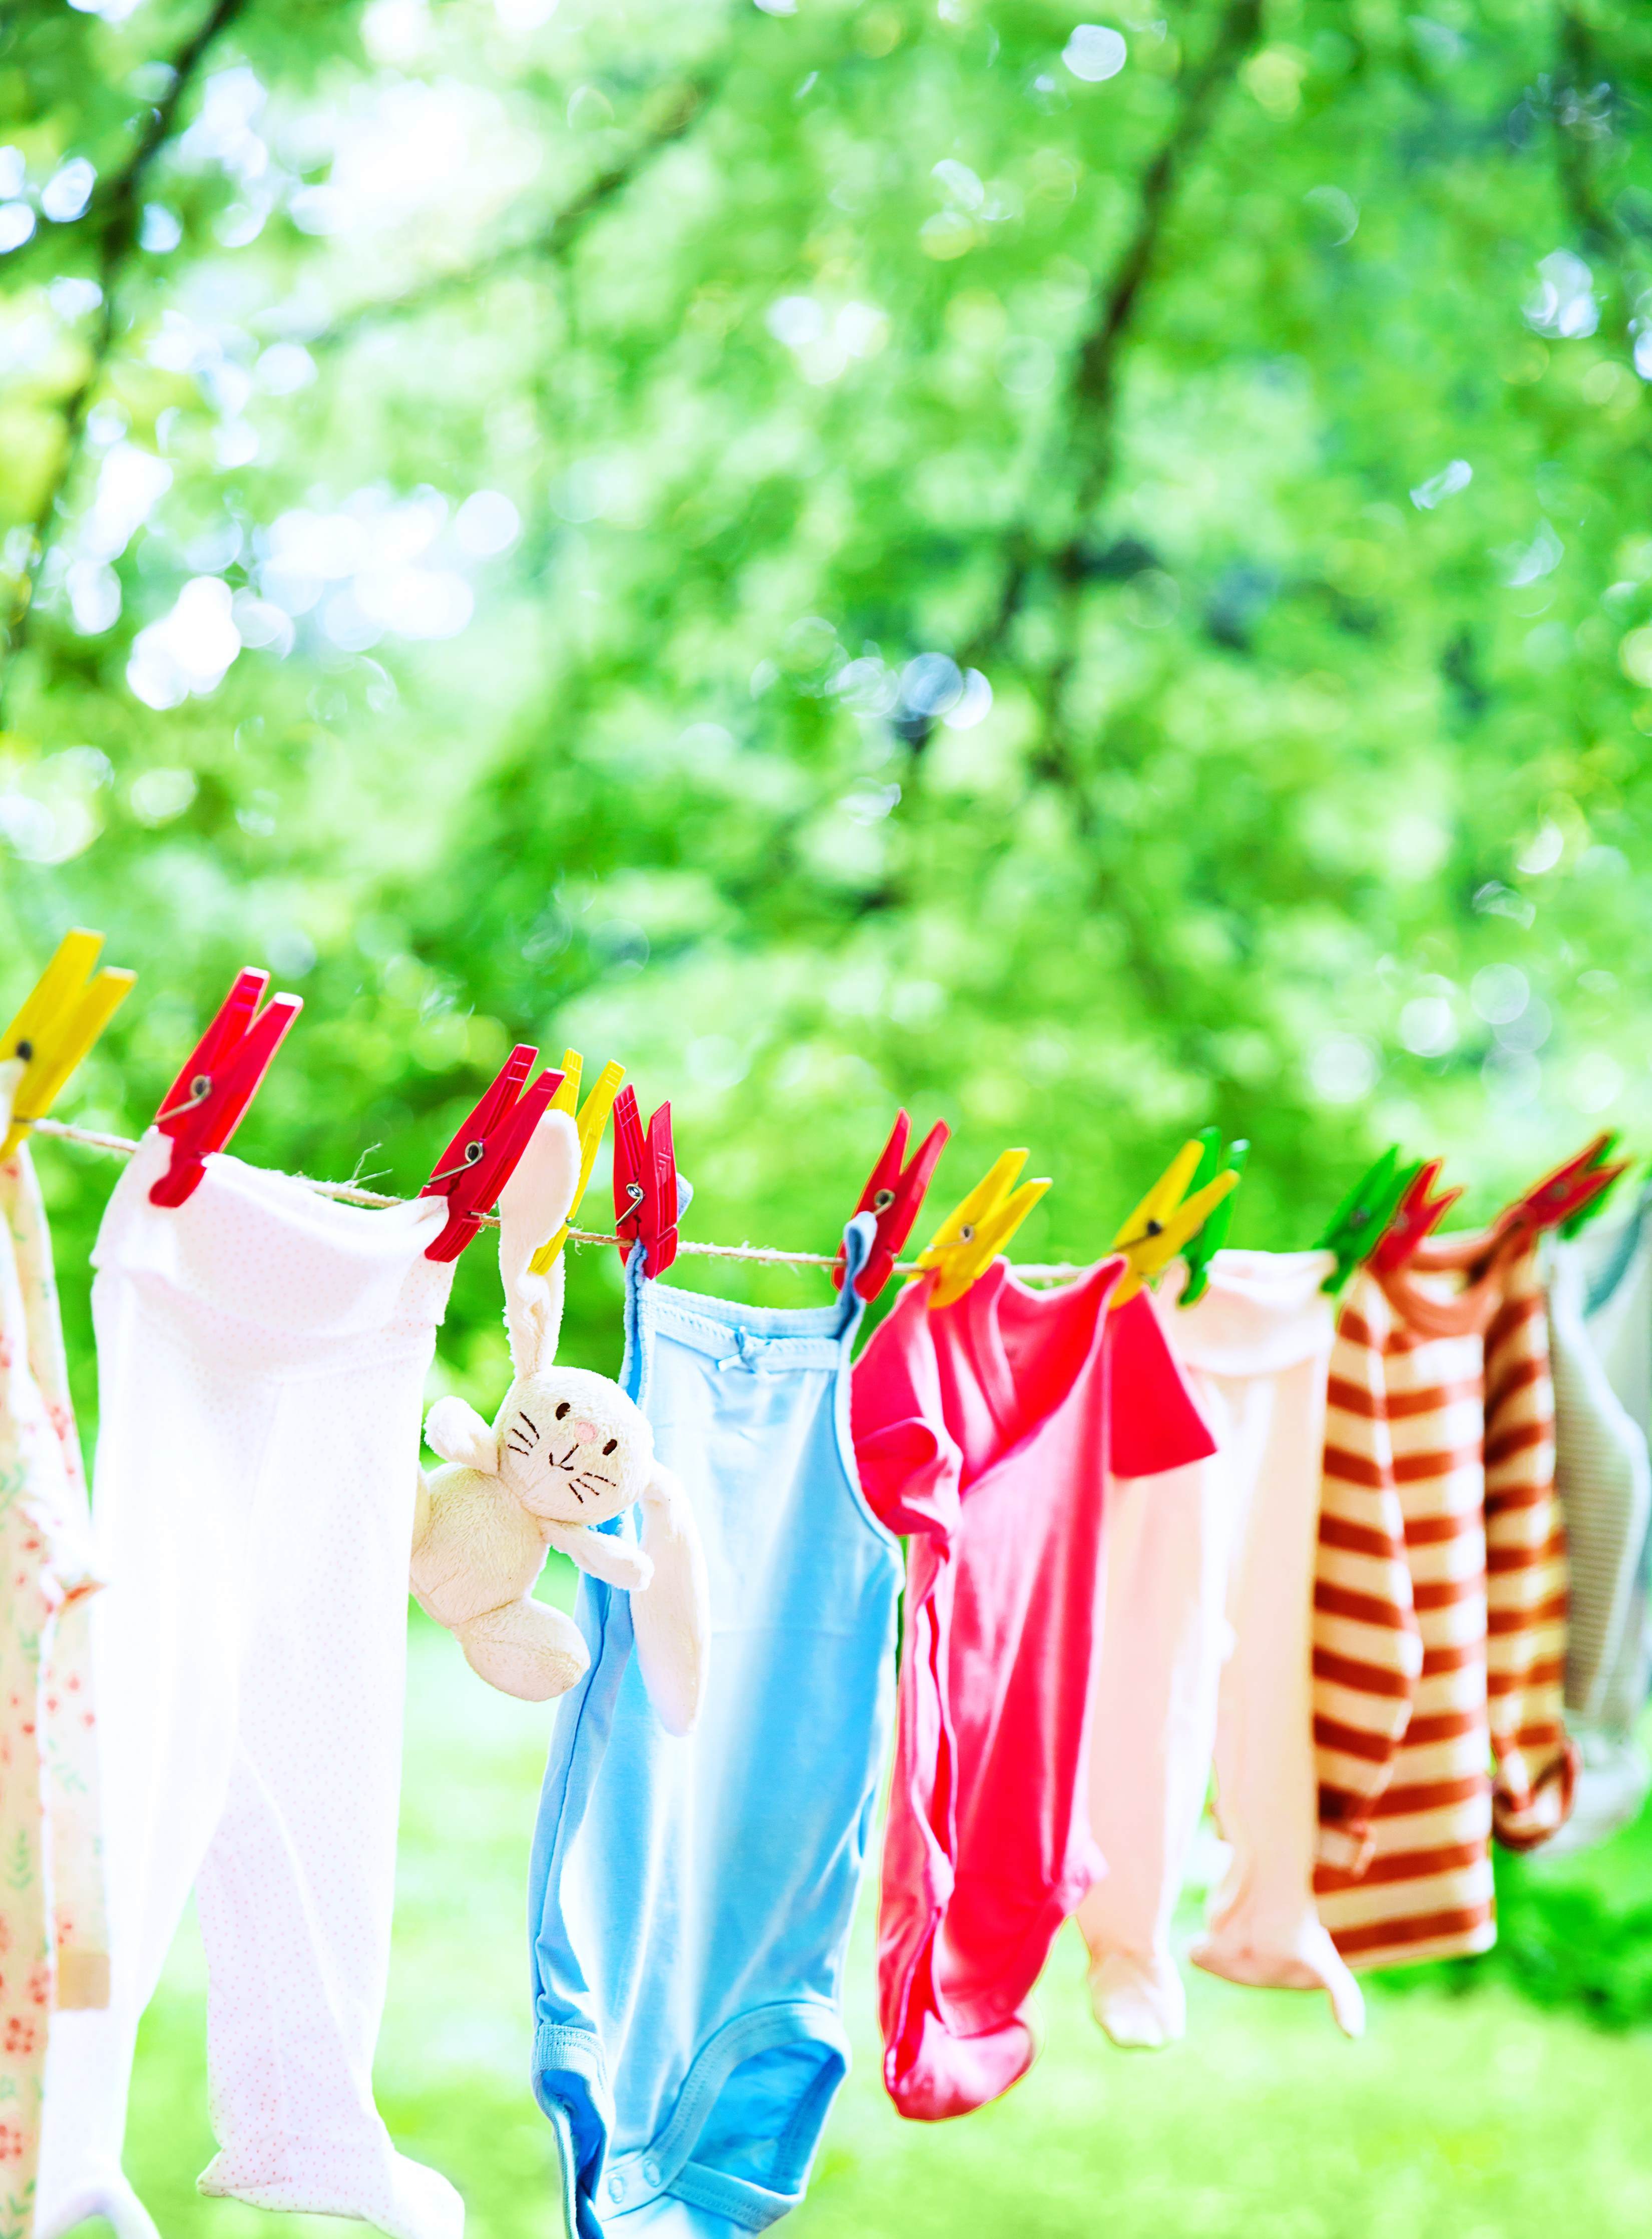 Clothes and teddy on washing line